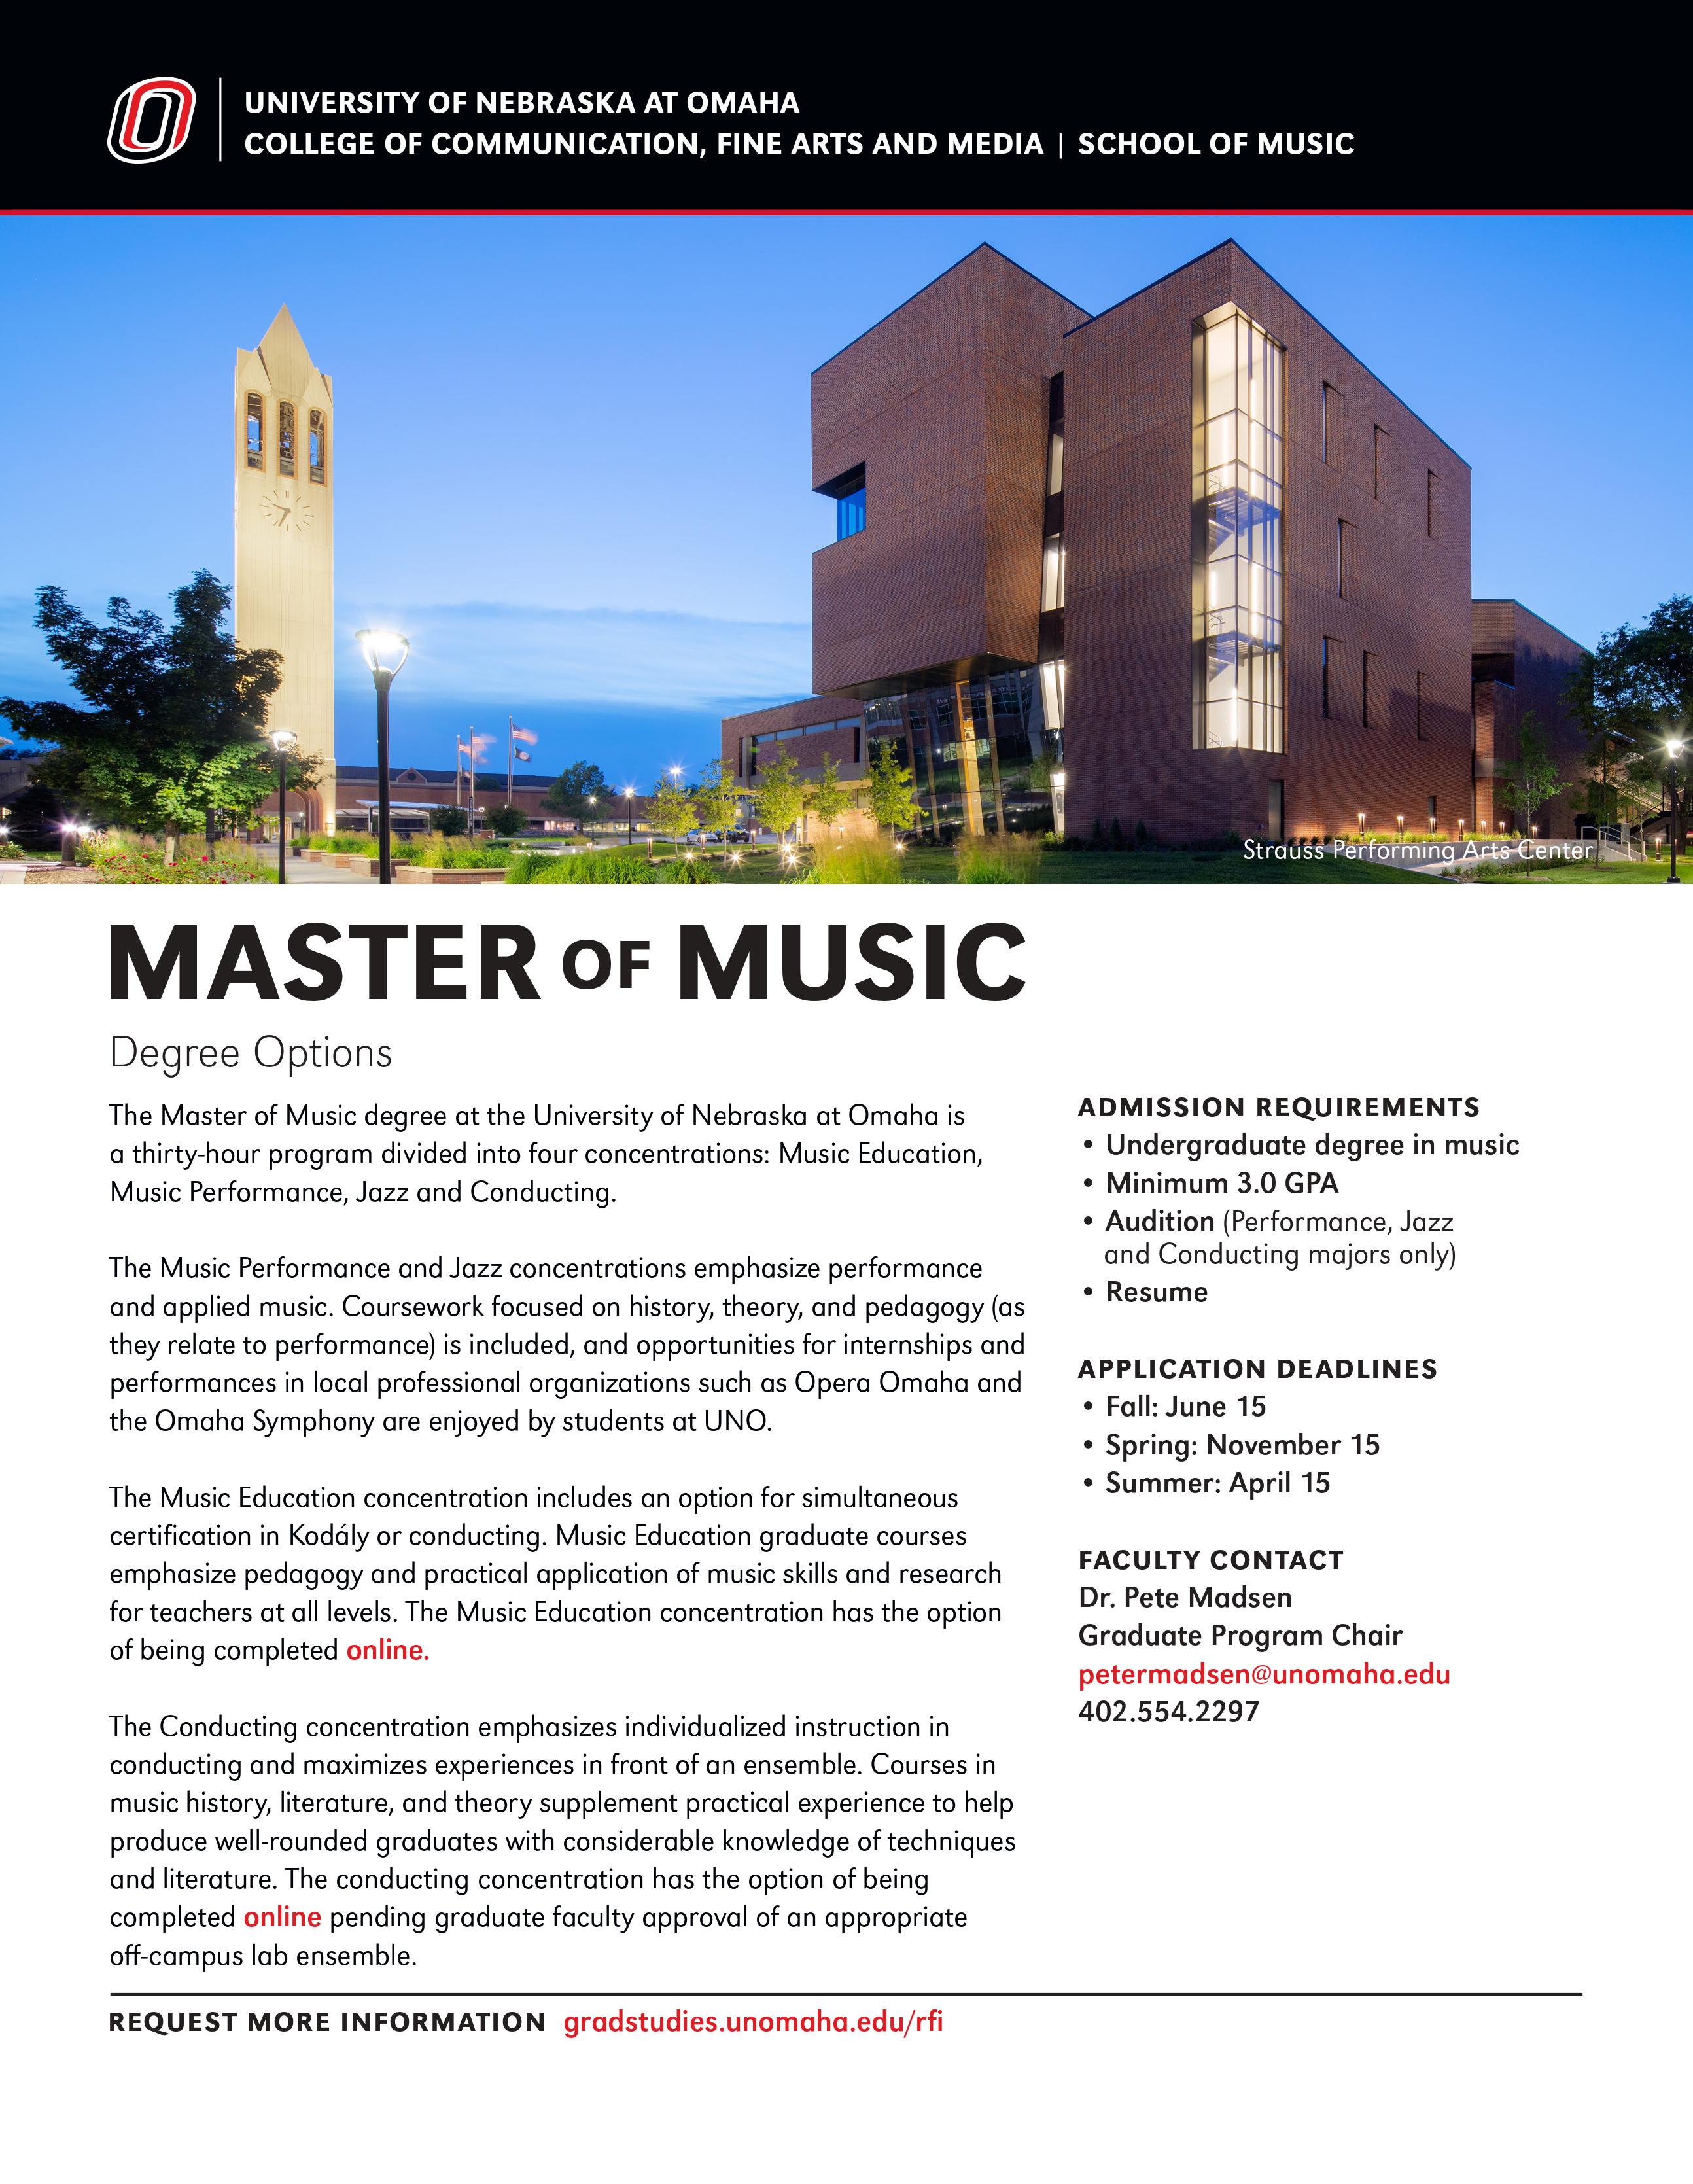 this is a PDF with information about the master of music options from the university of nebraska omaha's school of music